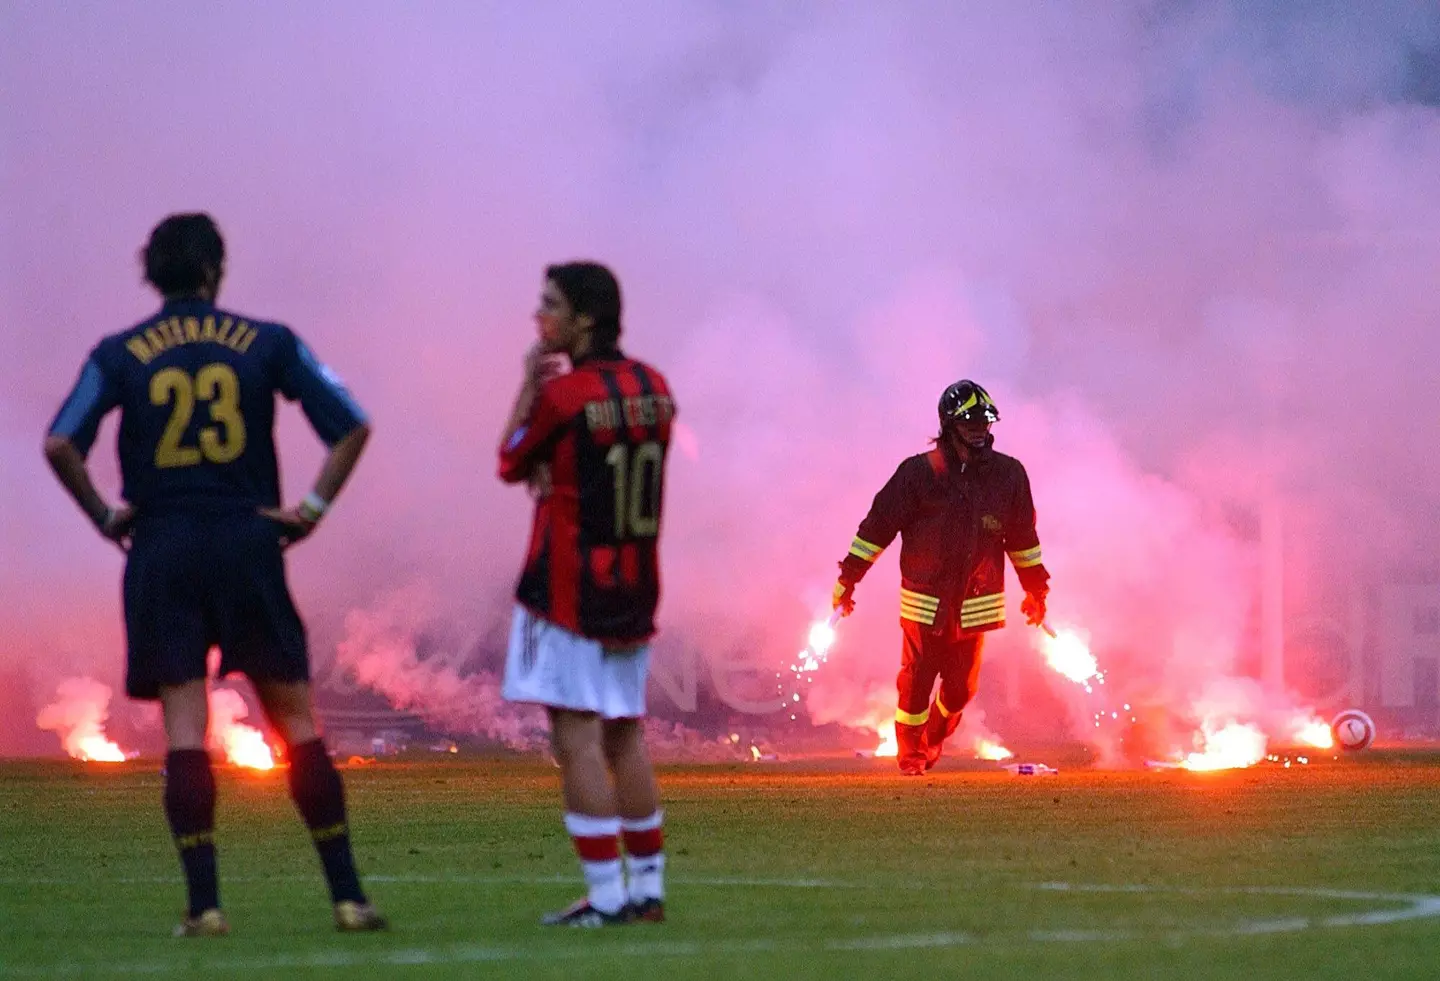 Materazzi and Costa talk as a fireman tries to put out the flares. Image: Alamy